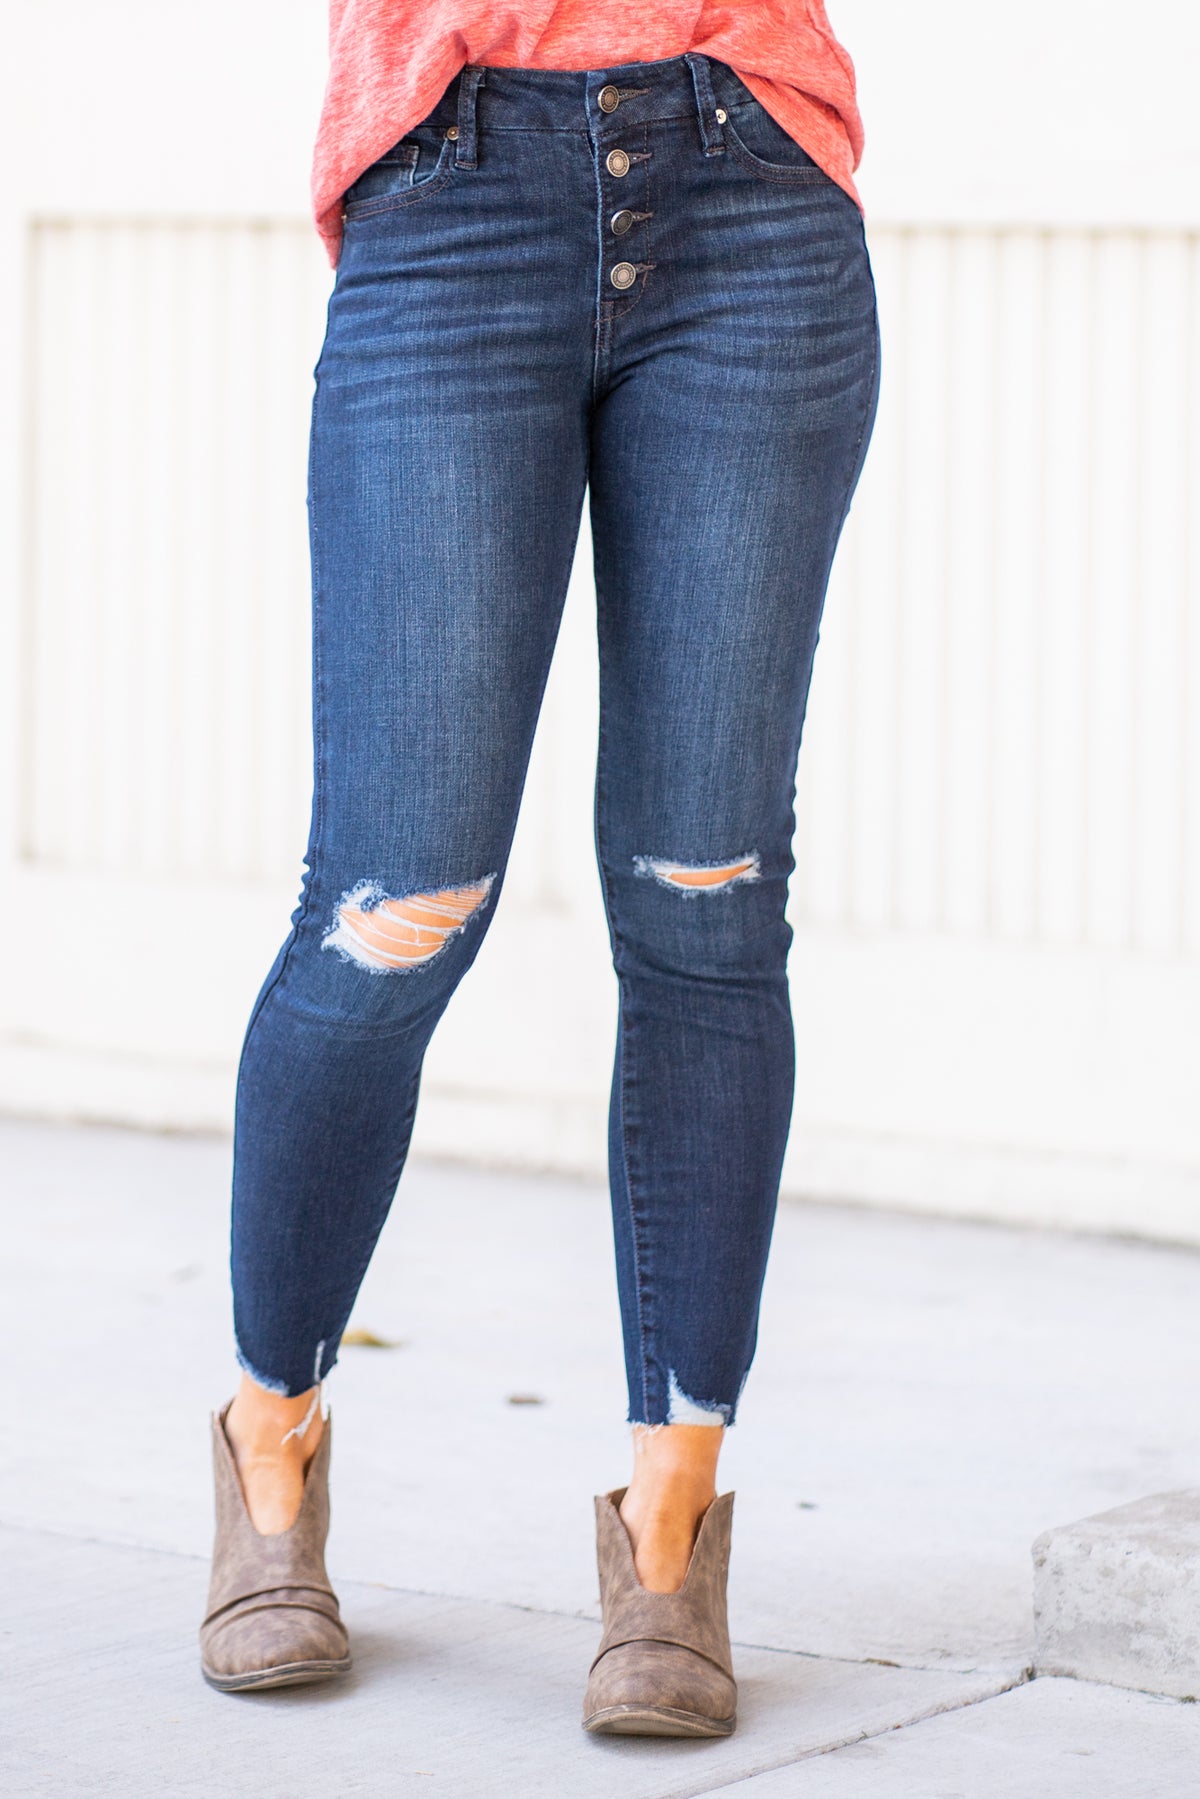 KanCan Jeans Color: Dark Wash Ankle Skinny, 27" Inseam*  Mid Rise, 9.5" Front Rise* Cuffed Hem Ankles 93% COTTON, 5% POLYESTER, 2% SPANDEX Fly: Zipper Style #: KC7156D Contact us for any additional measurements or sizing.